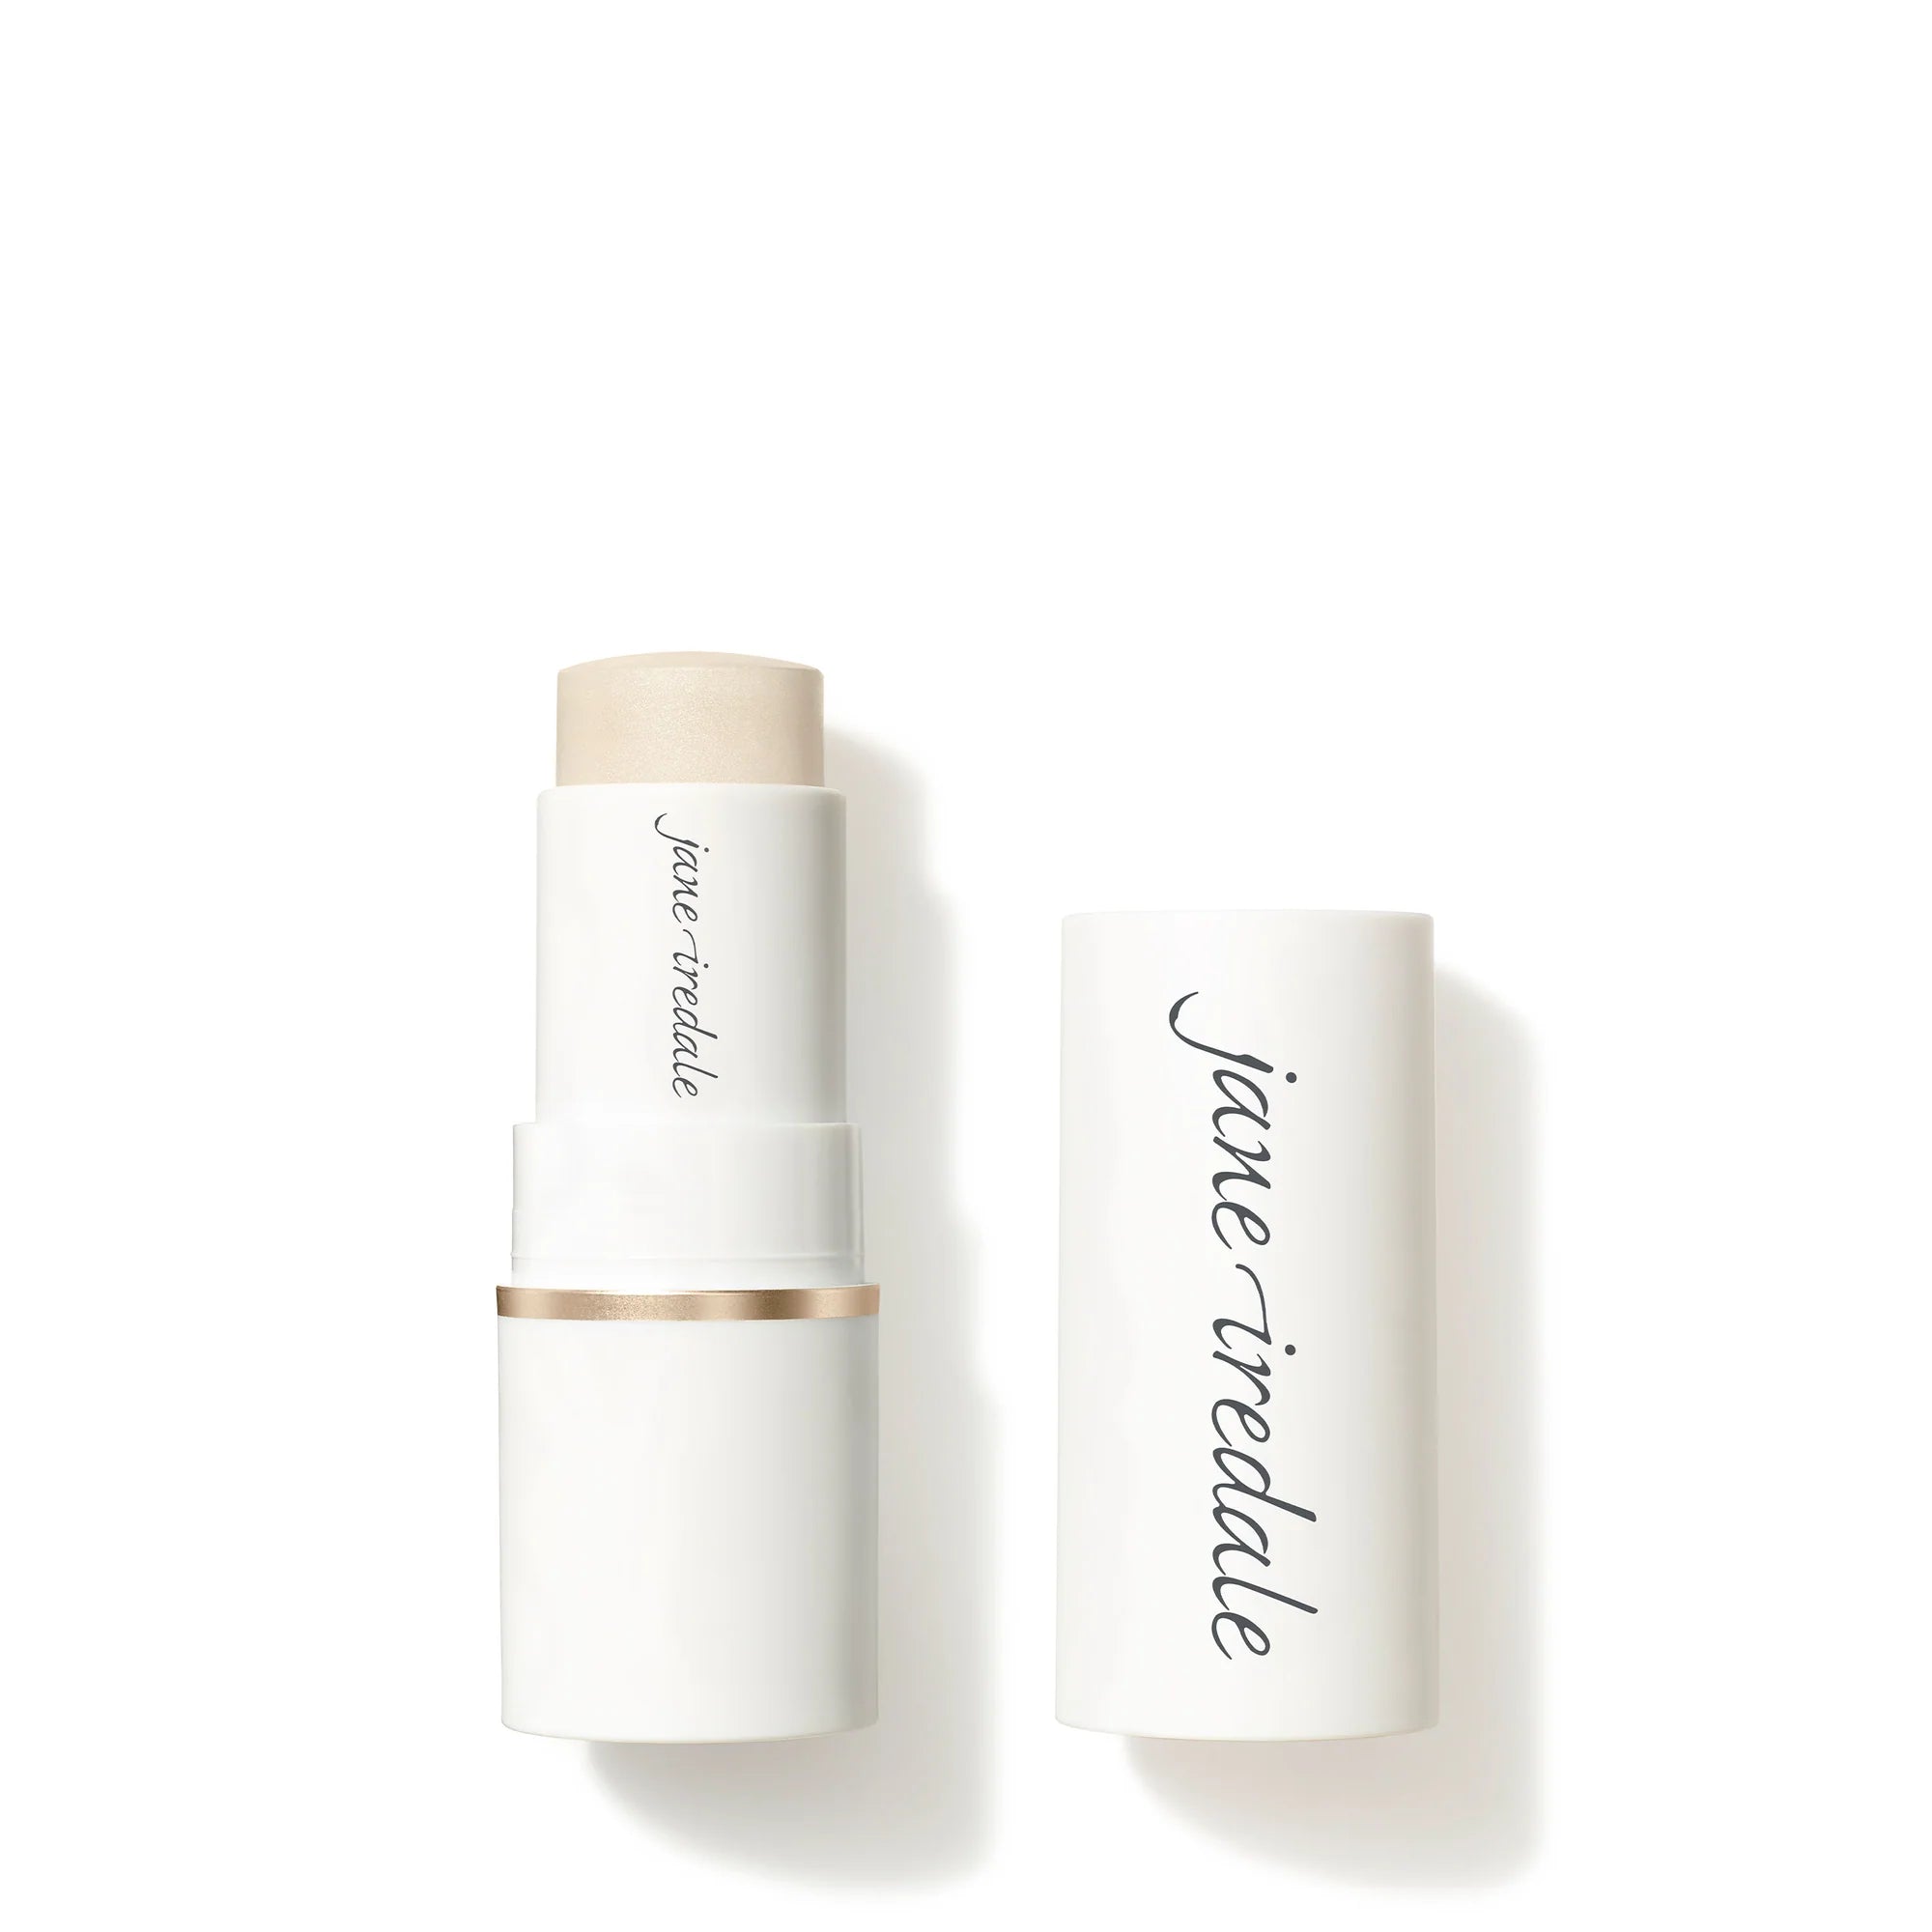 Jane Iredale's Glow Time Highlighter Stick